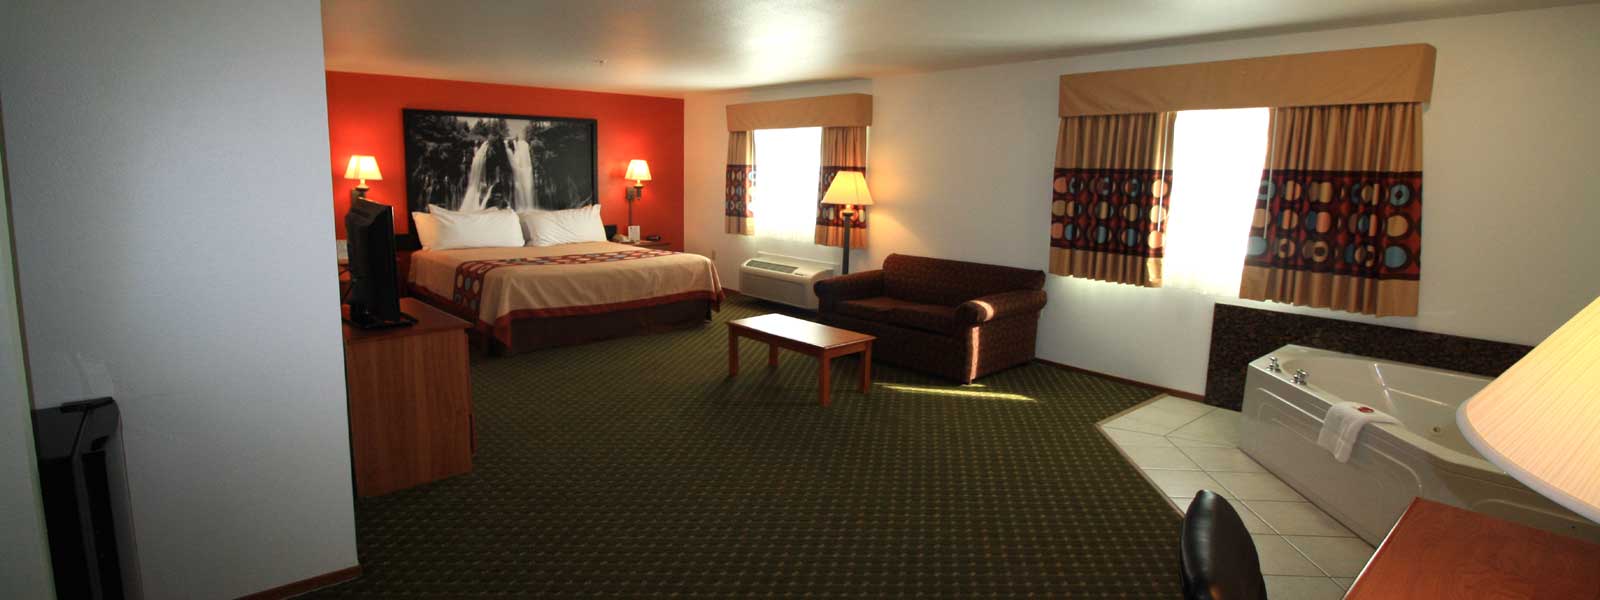 Super 8 Wine Country Sonoma Affordable Lodging in Cloverdale California Clean Comfortable Rooms Newly Remodeled Close to Downtown